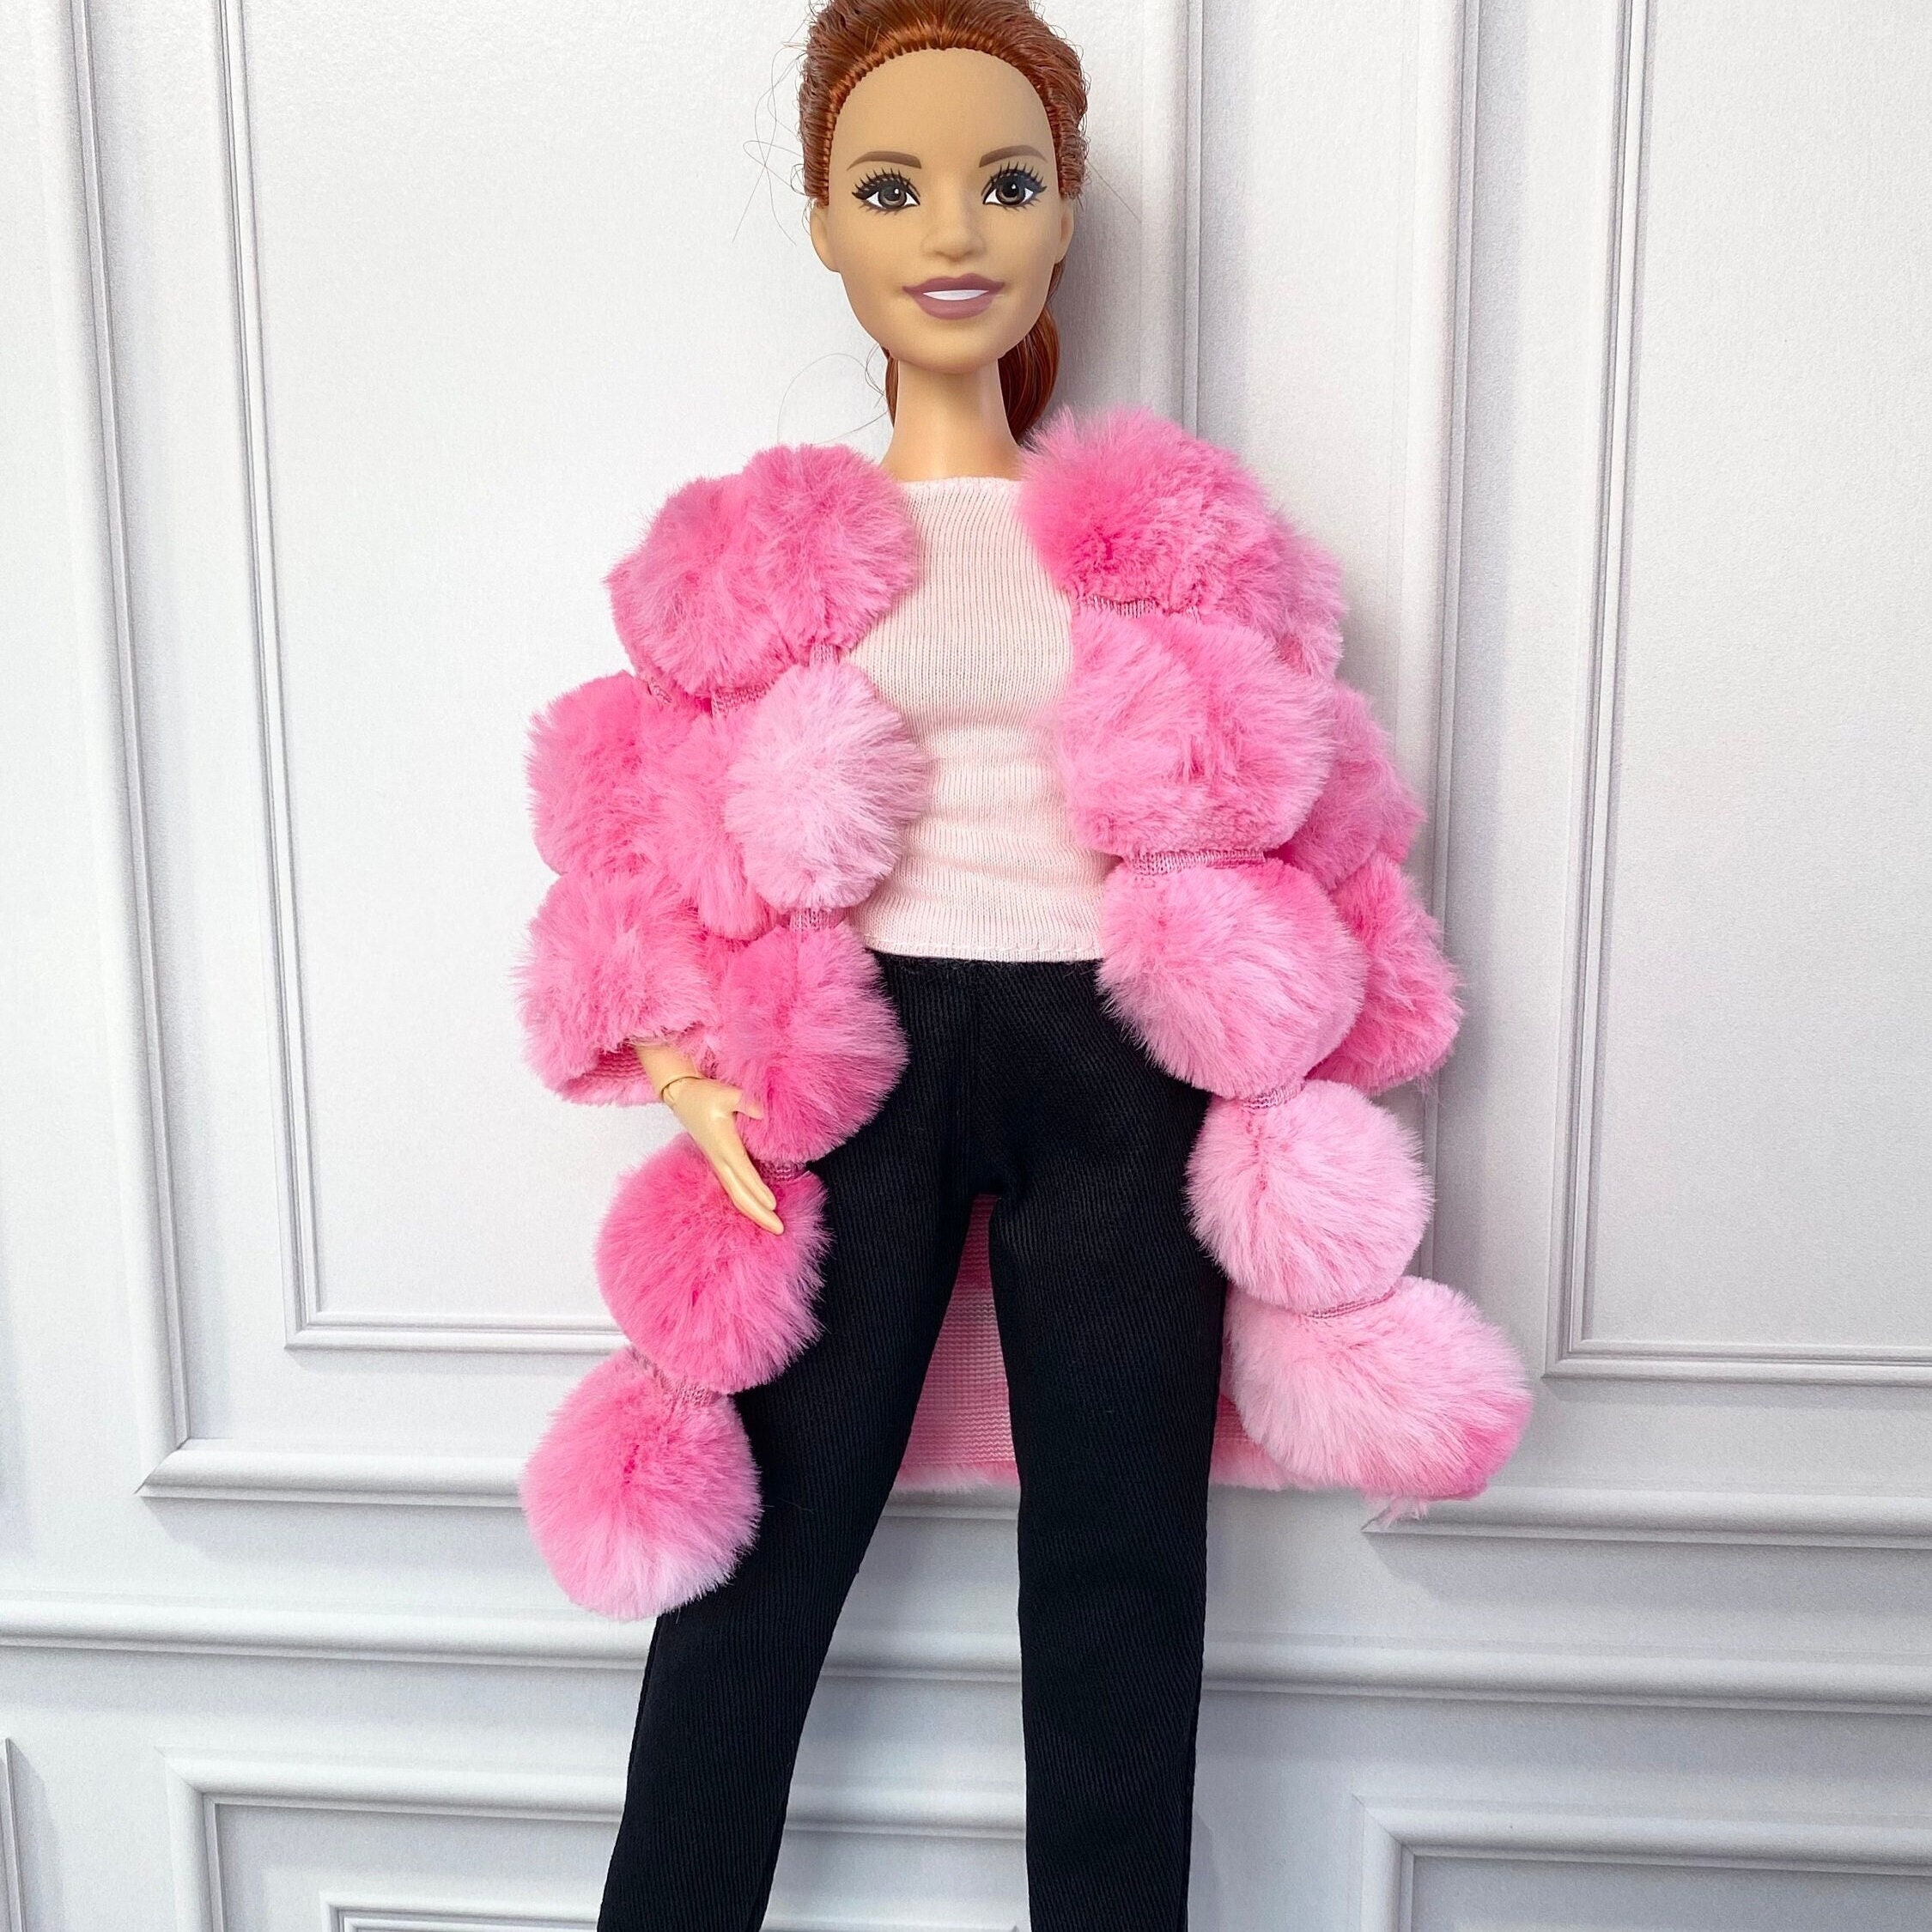 NK Official Cute Dress Outfit Pink Skirt Fashion Shirt Casual Wear Blue  Dress for Barbie Doll Clothes Accessories Toy